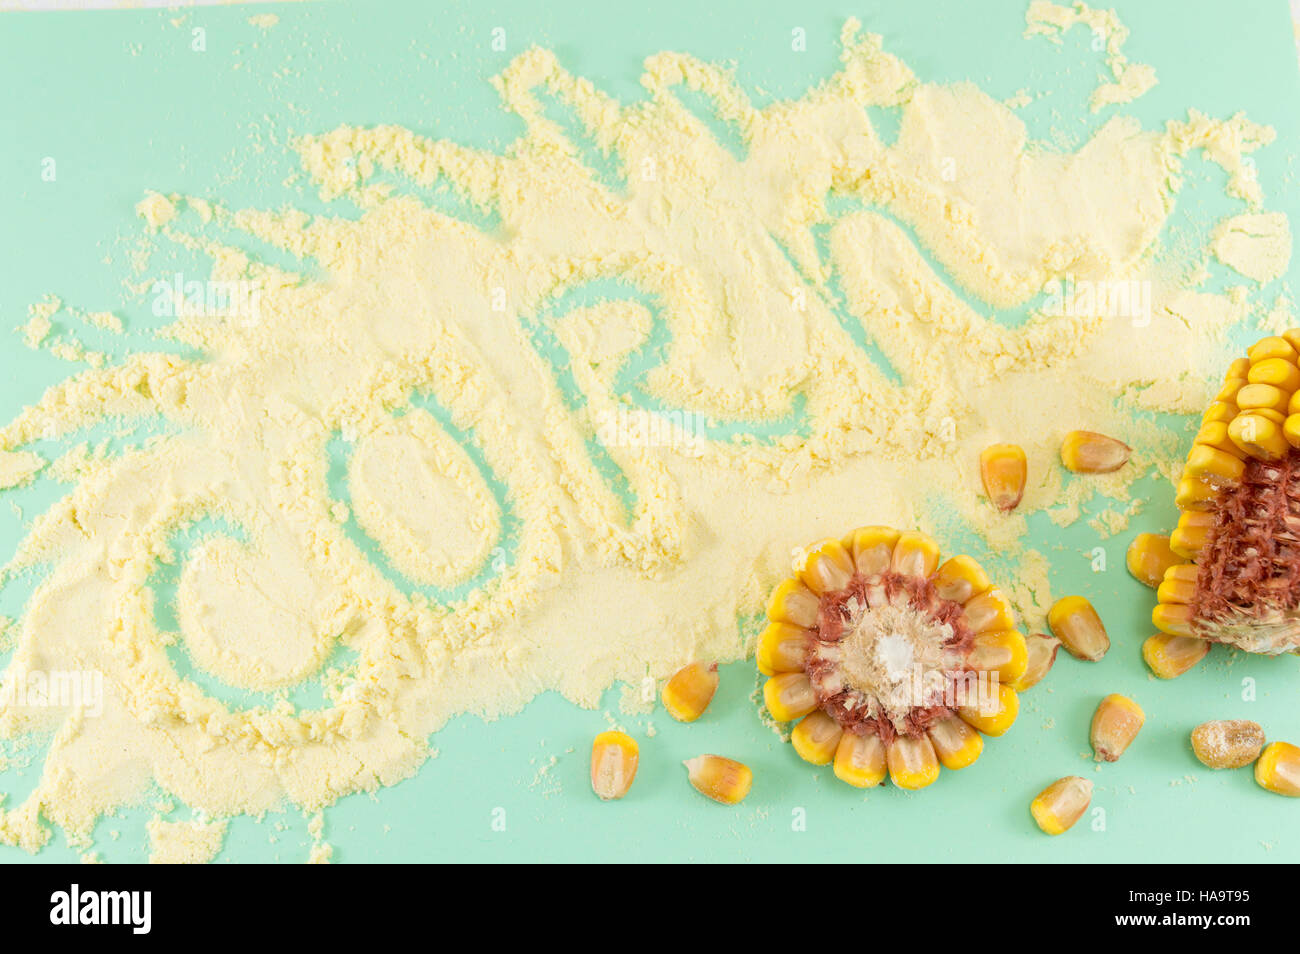 corn flour with the word corn written in it with corn cobs Stock Photo